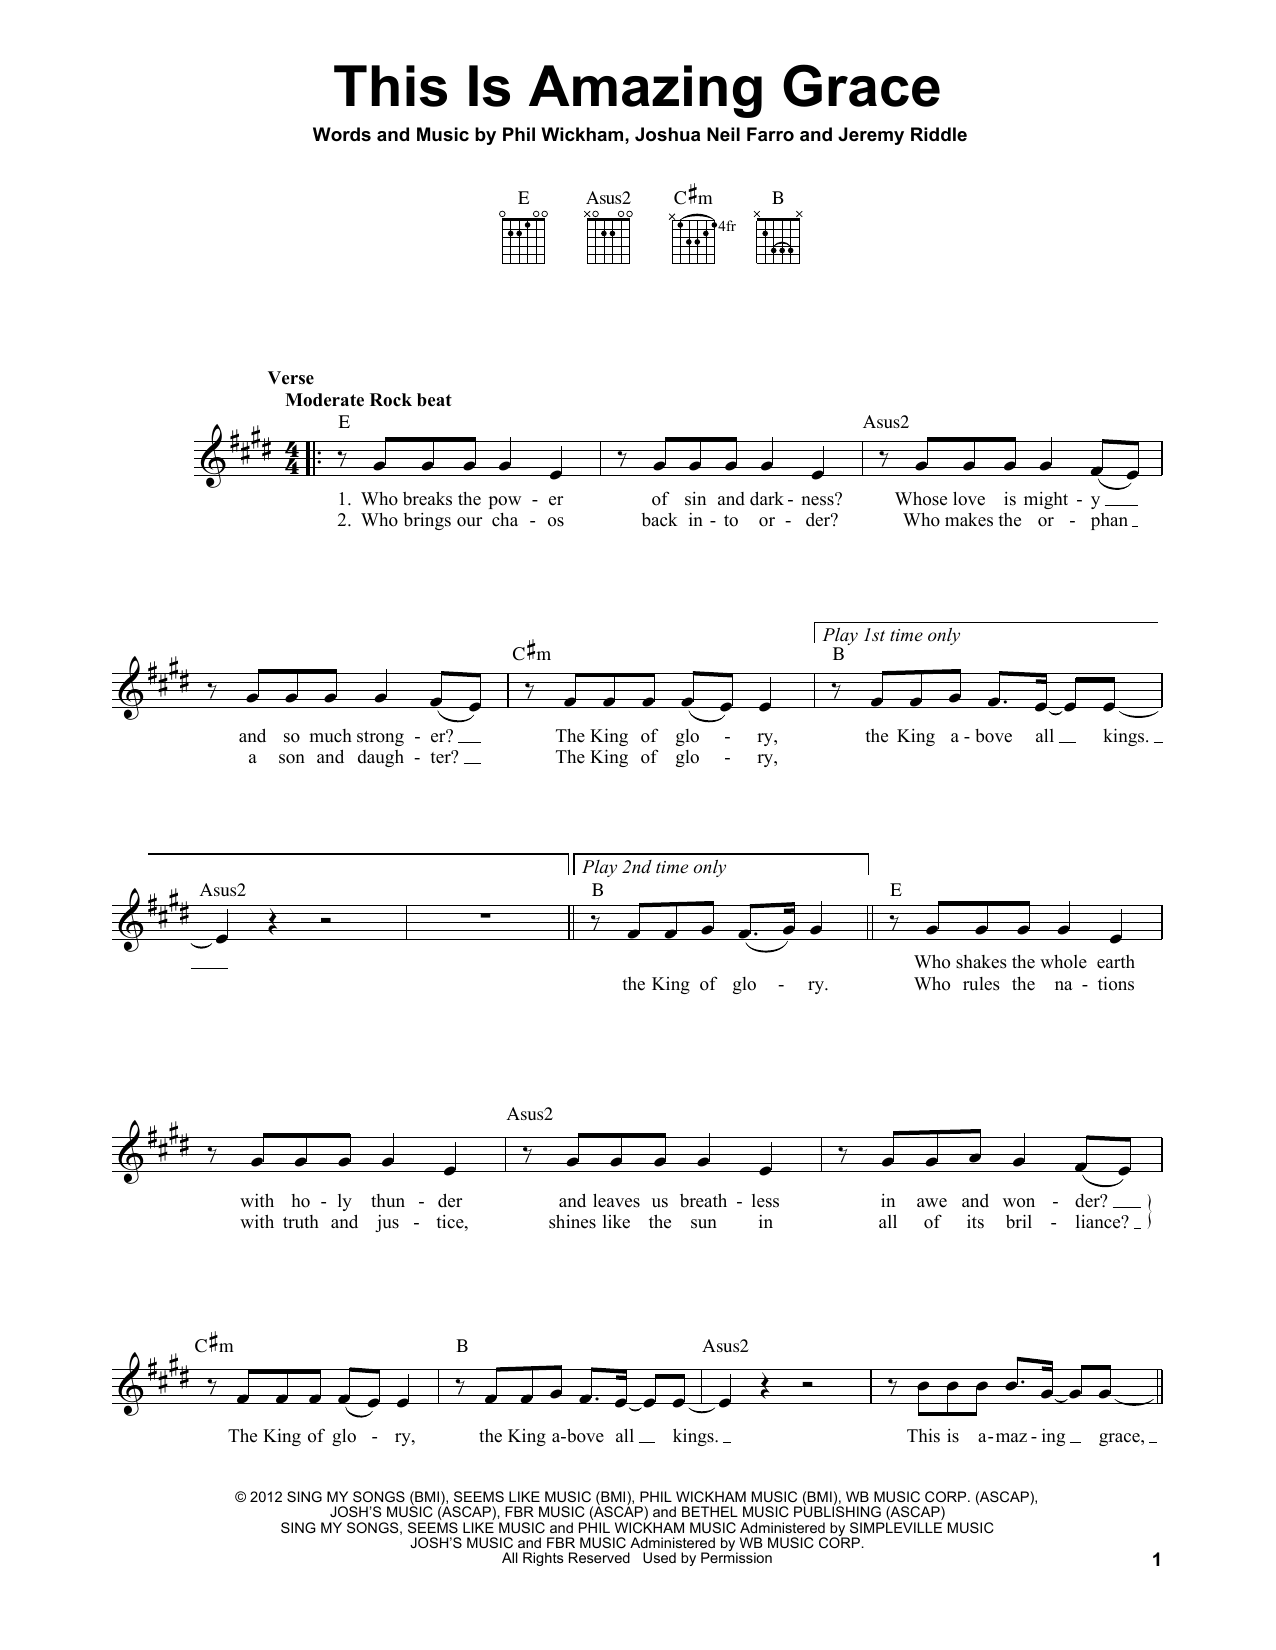 Download Phil Wickham This Is Amazing Grace Sheet Music